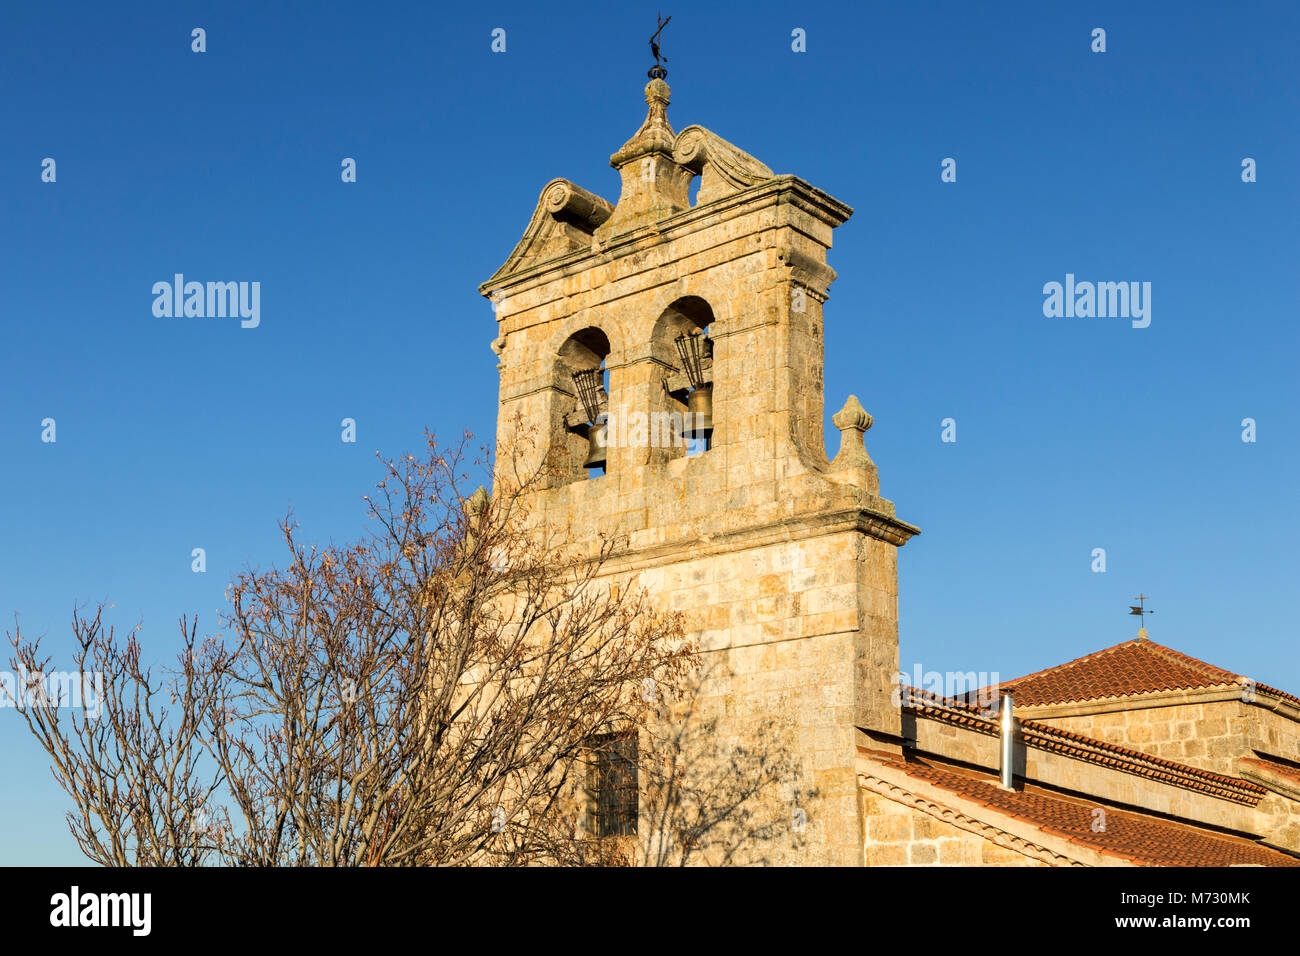 The Church of Our Lady of the Assumption (Iglesia de la Asuncion) in Peleas de Arriba, a small town in the Province of Zamora, Castile and Leon, Spain Stock Photo